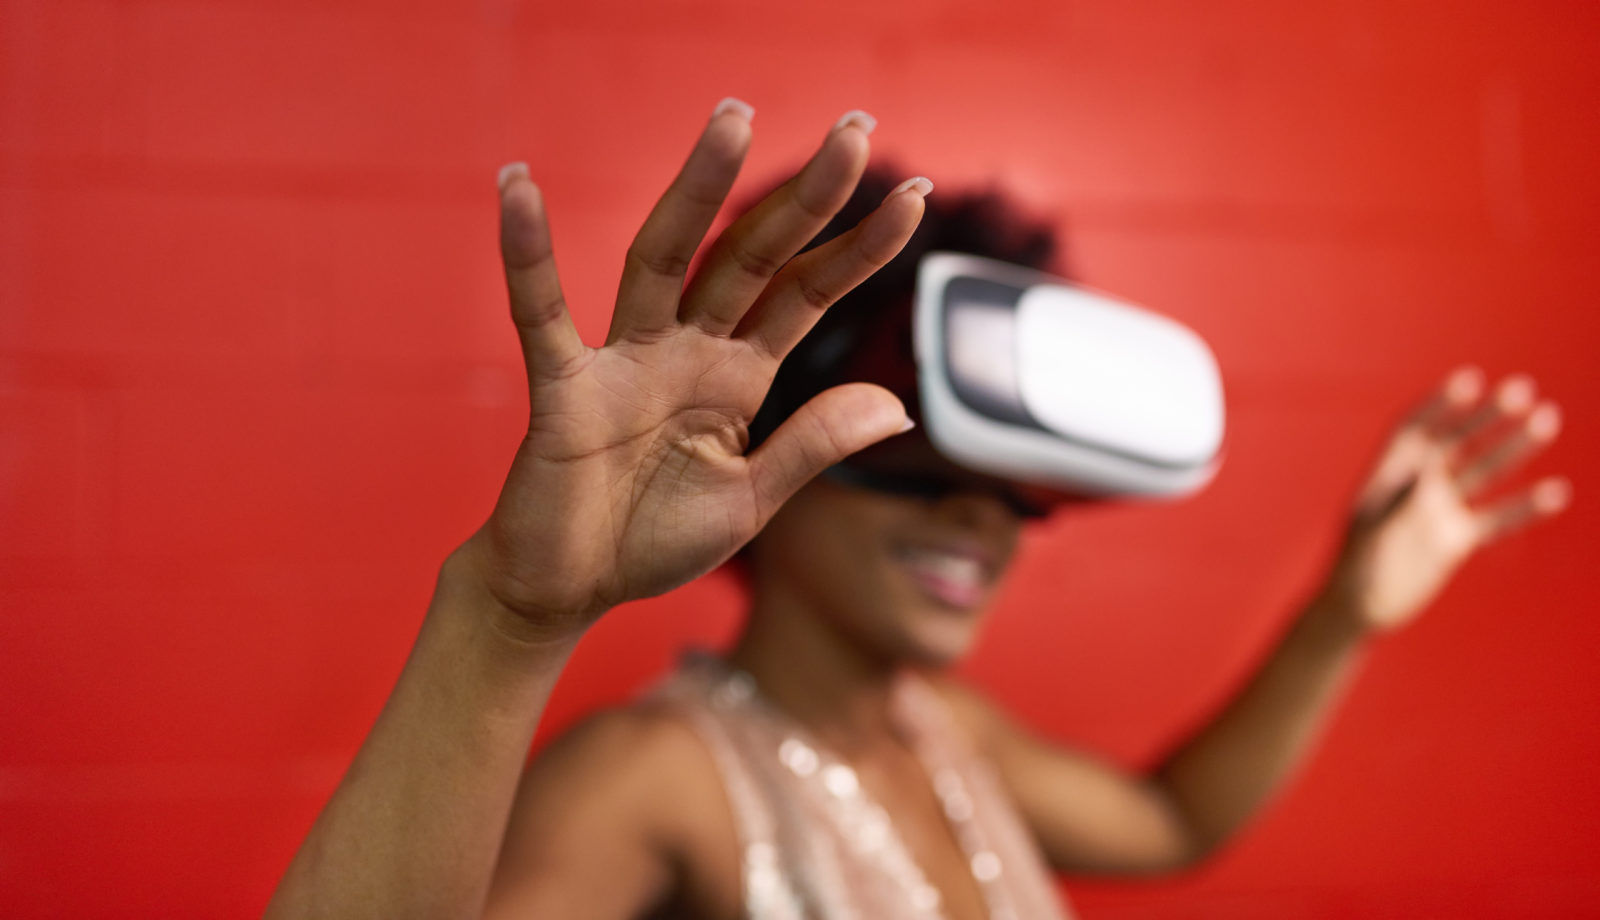 A Year in Virtual Reality